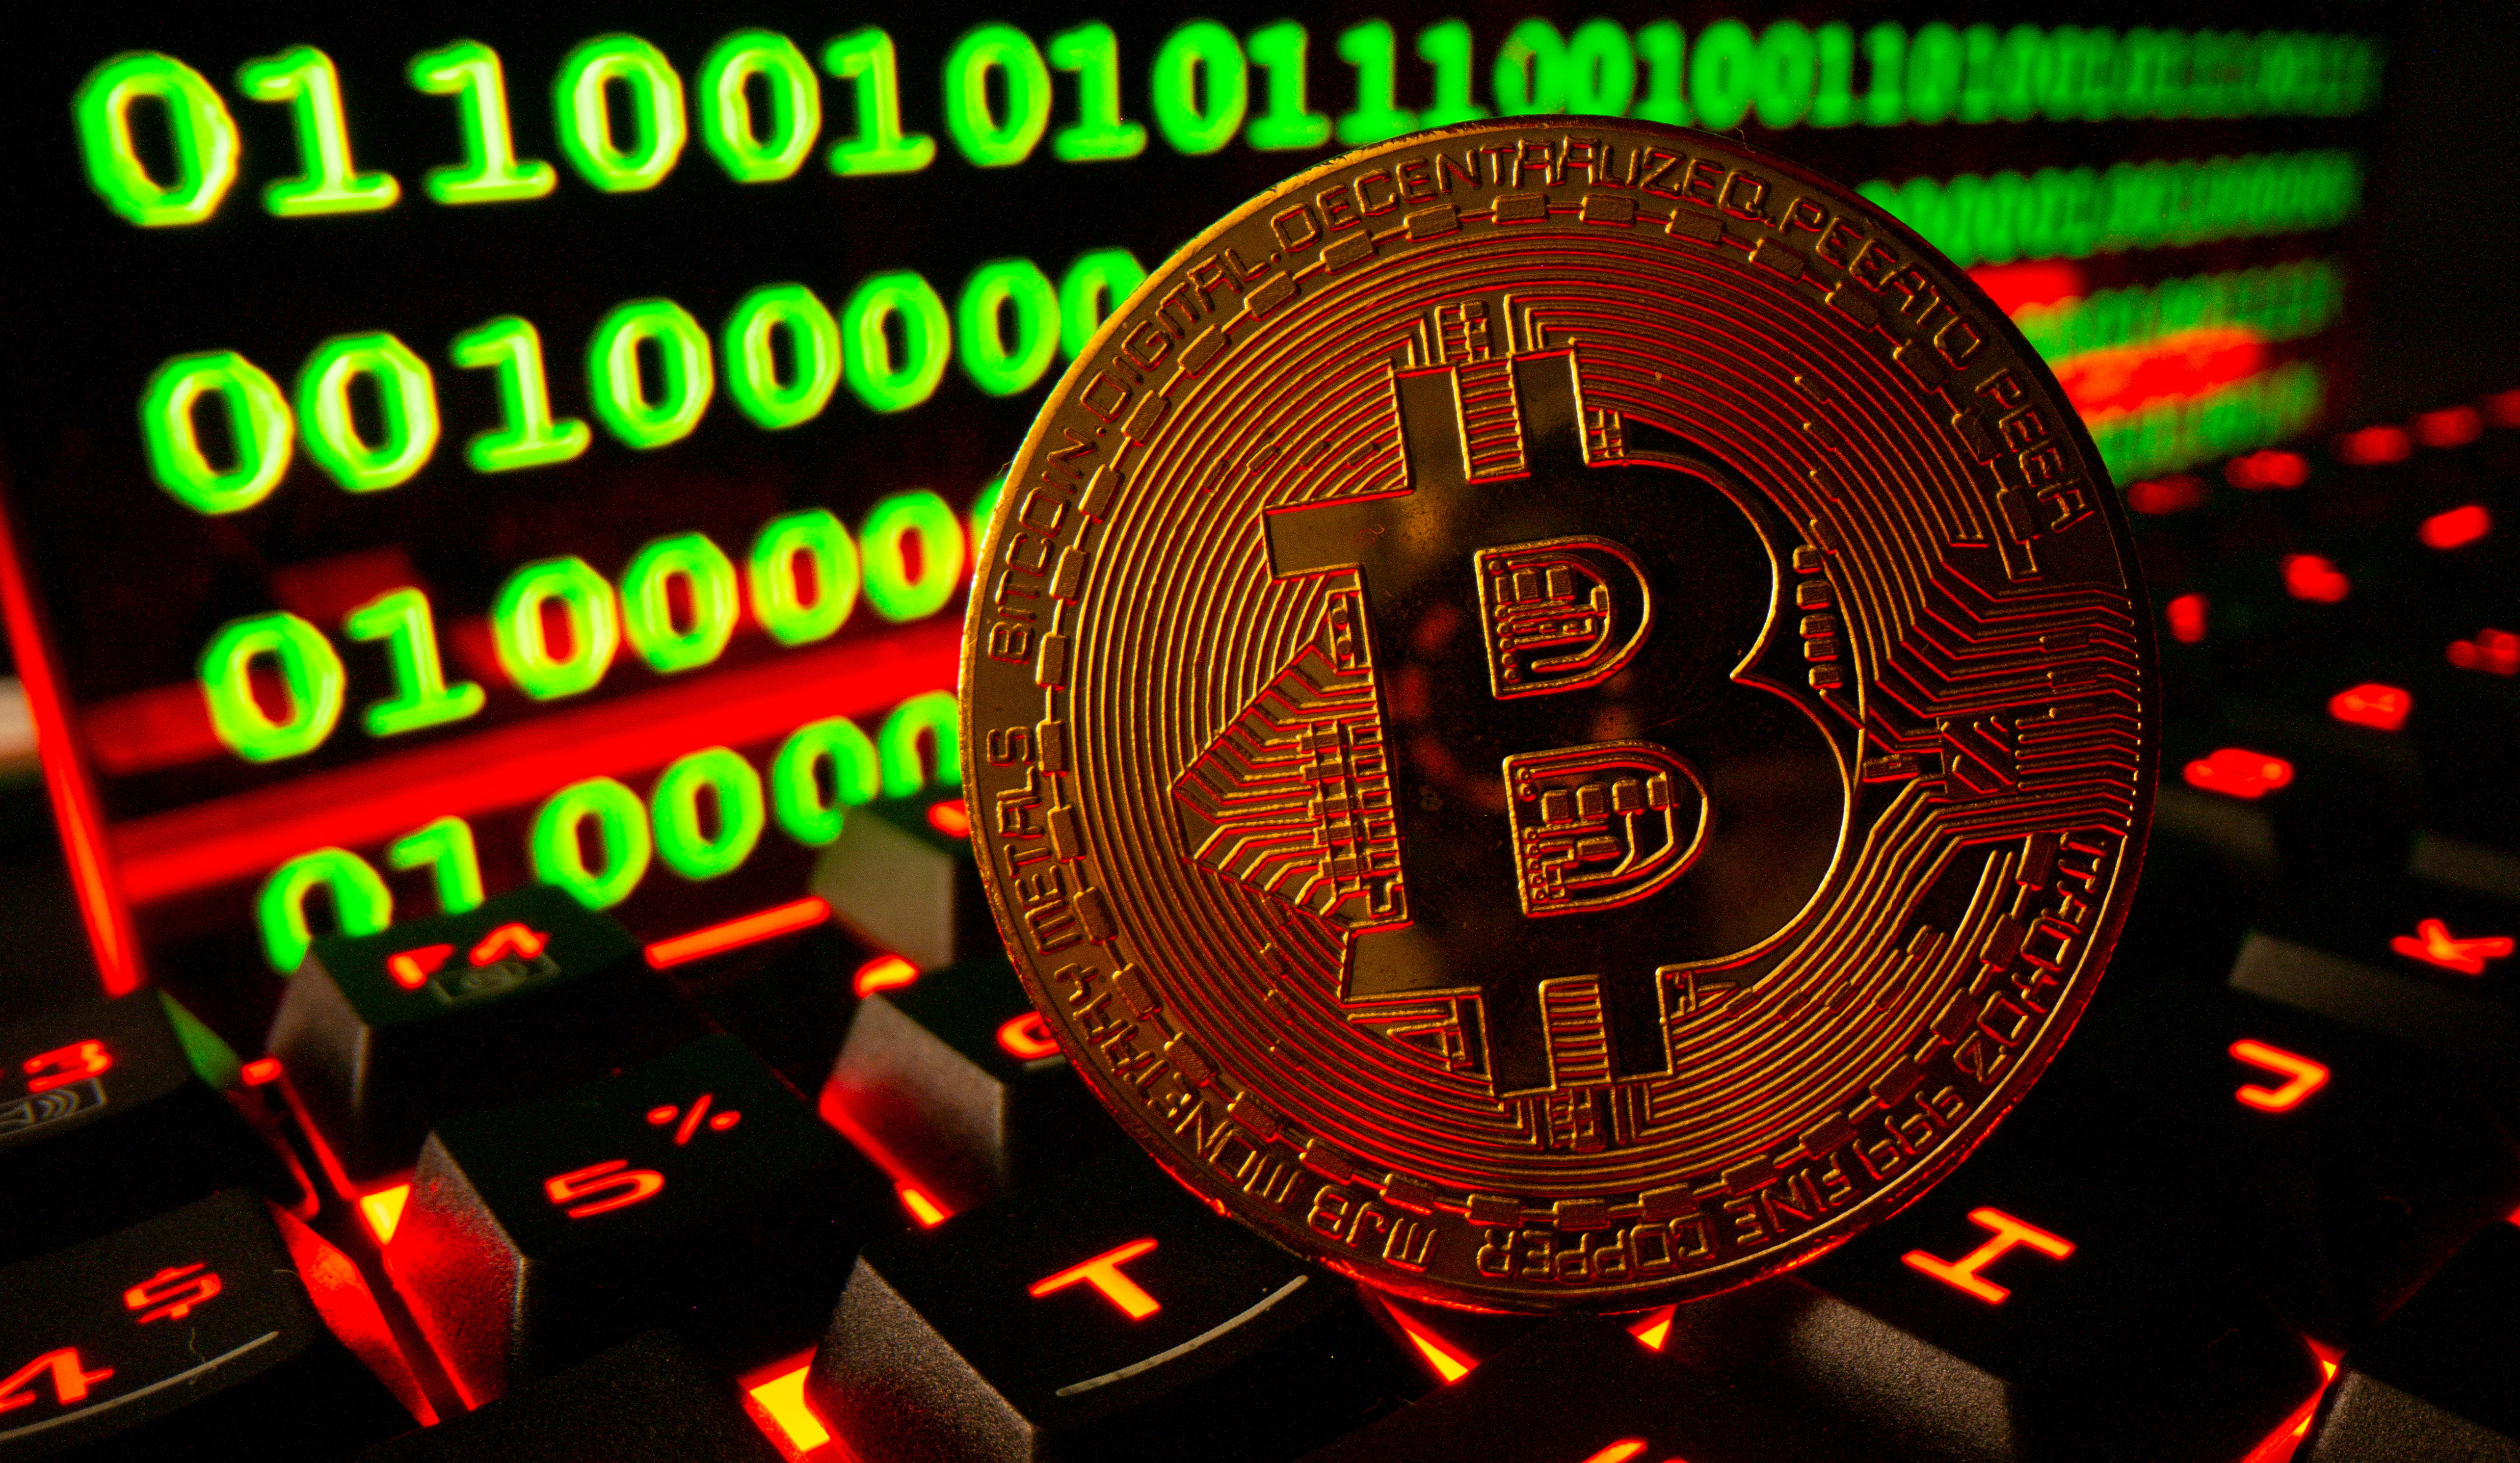 FILE PHOTO: Bitcoin cryptocurrency representation is pictured on a keyboard in front of binary code in this illustration taken September 24, 2021. REUTERS/Dado Ruvic/Illustration/File Photo